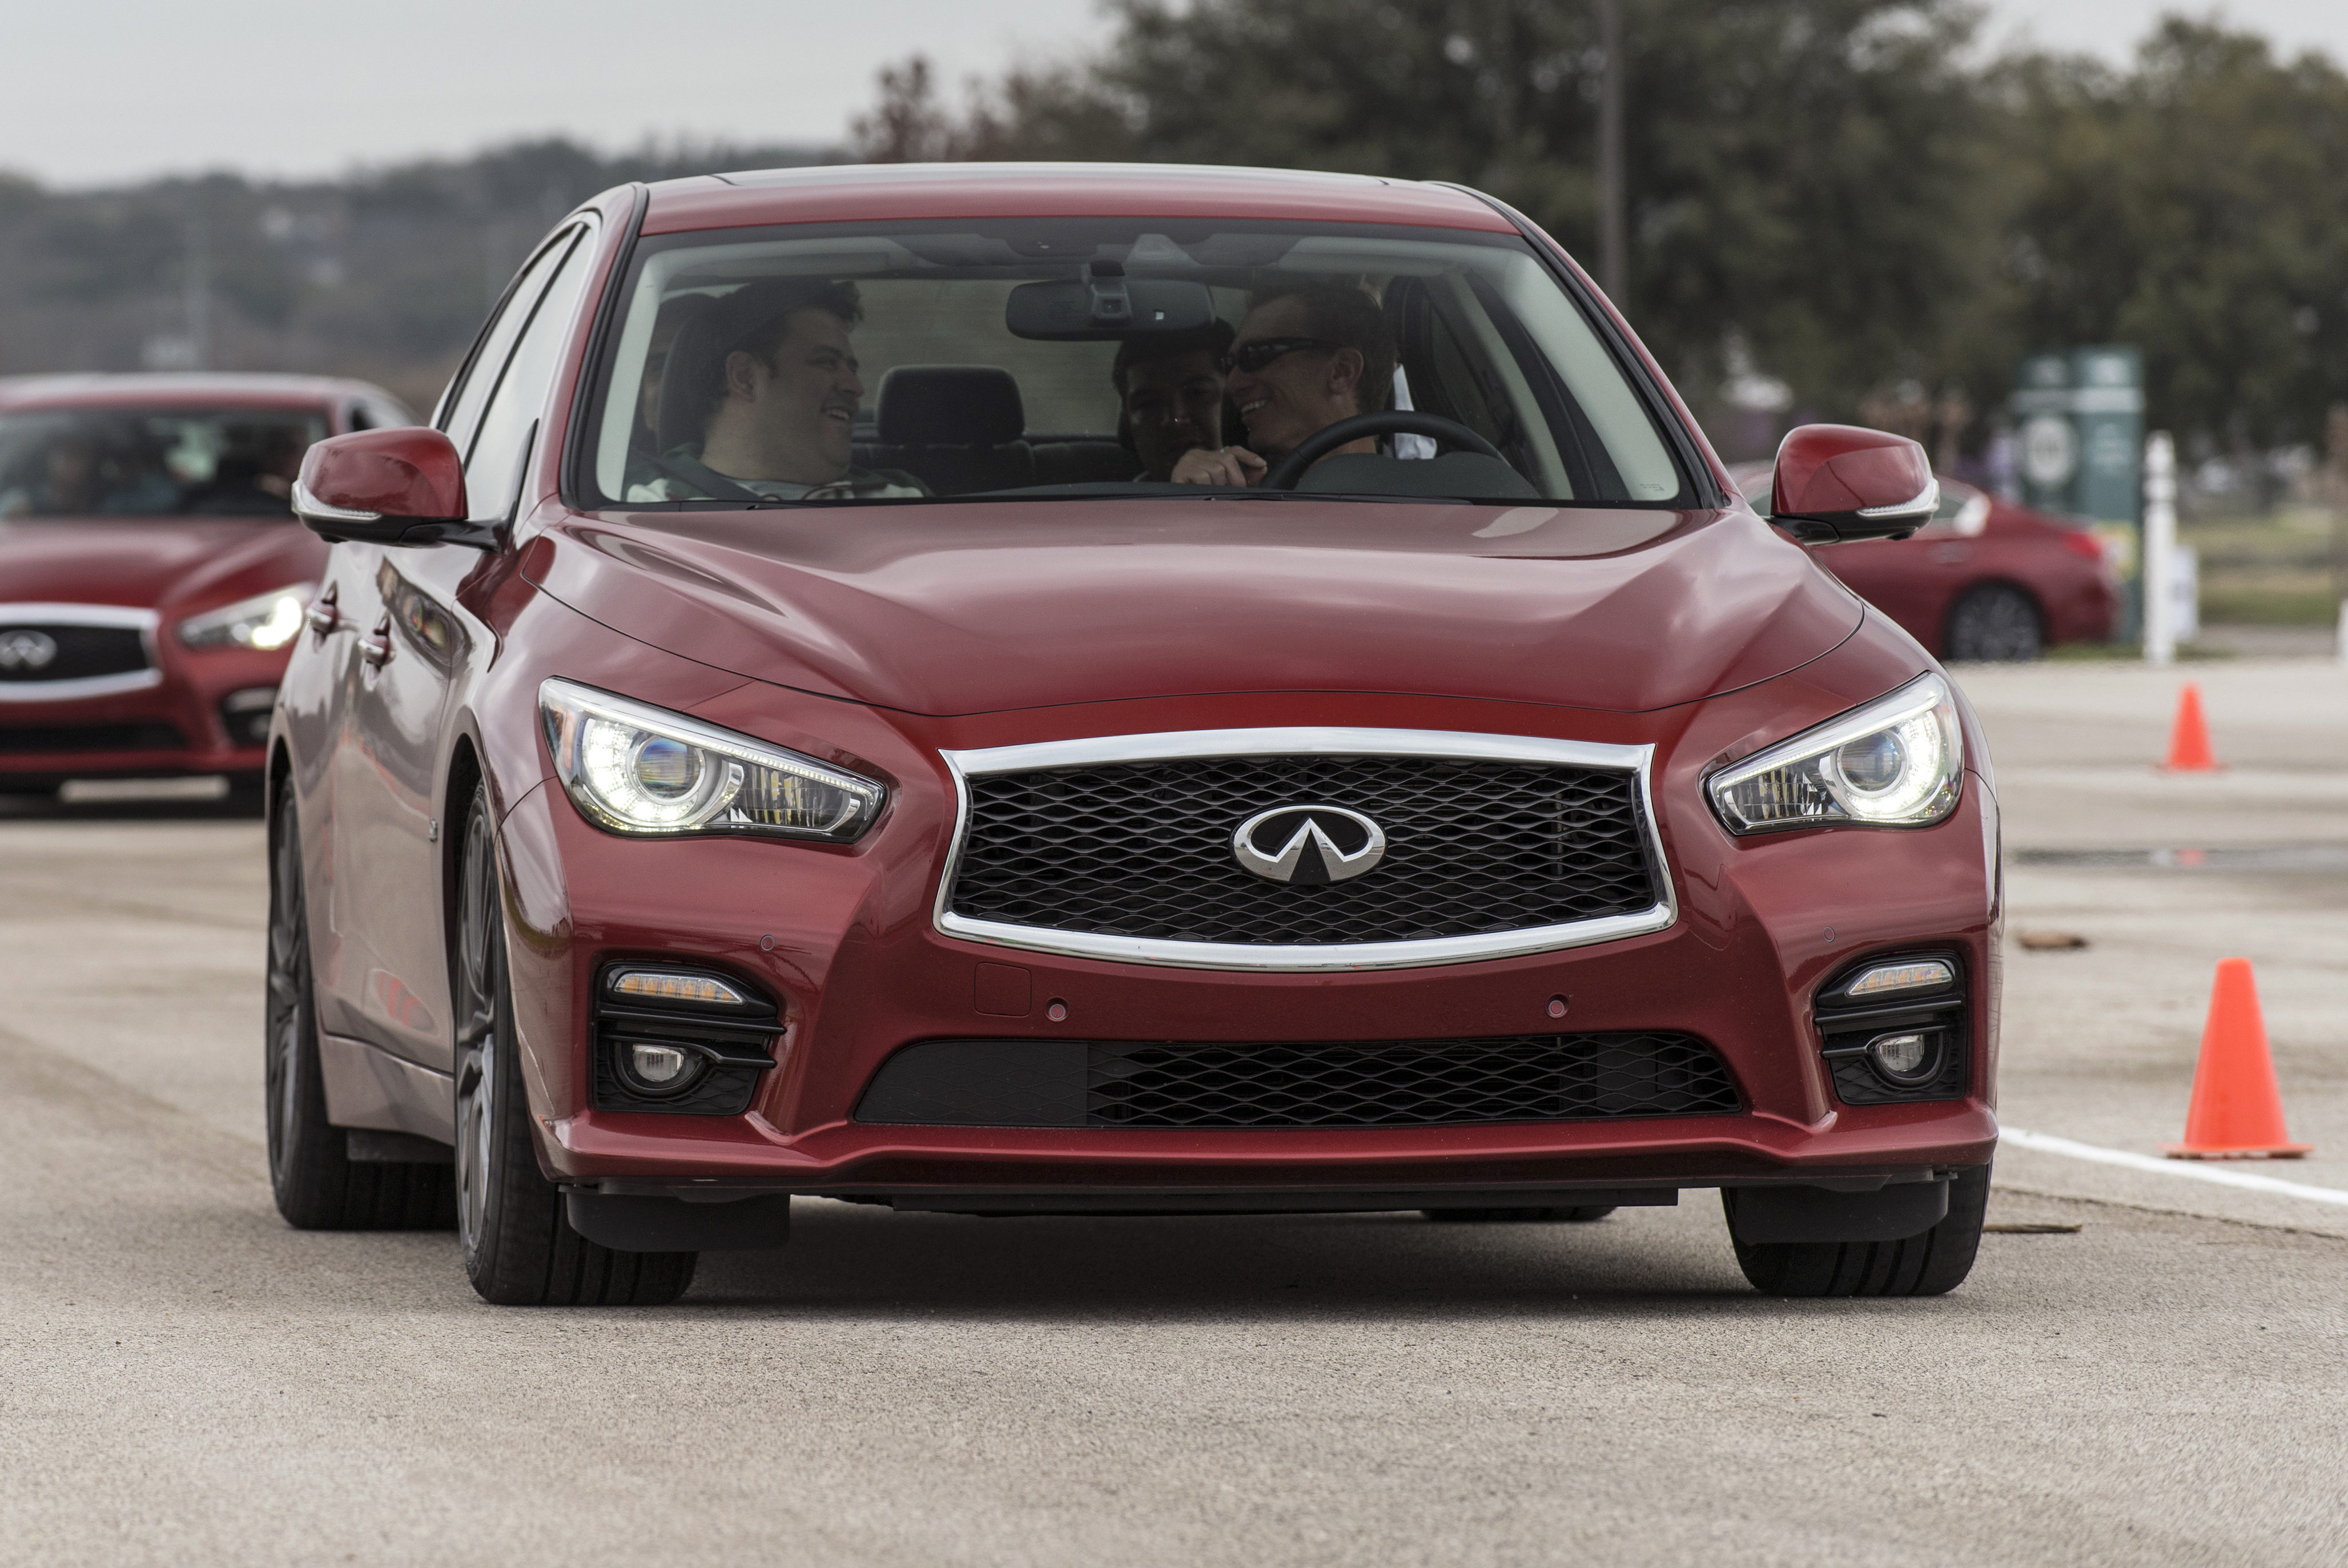 Indications of safety technology on the 2016 Infiniti Q50 can be seen on the rear-view mirror and bumper fascia in this image. (Provided by Infiniti)